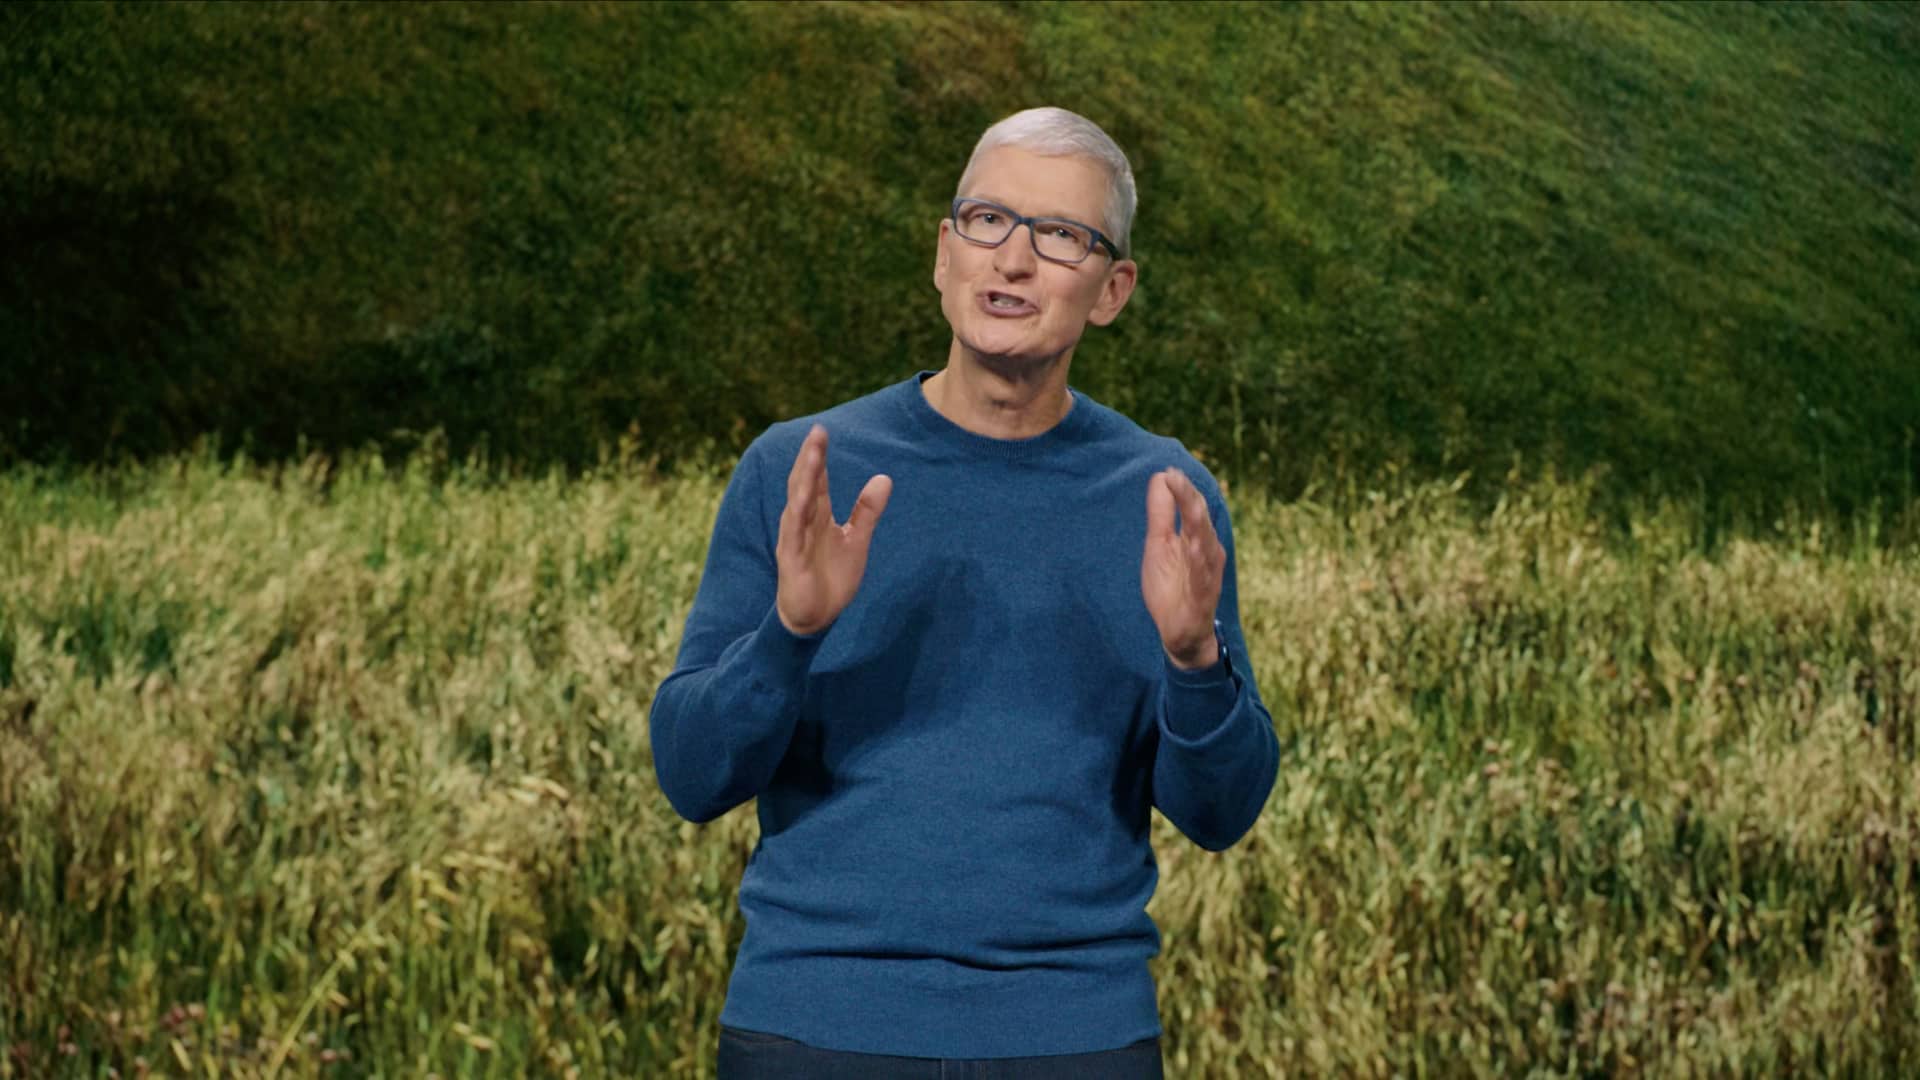 A still image taken from Apple's September 2021 “California Streaming” event video which shows CEO Tim Cook standing on stage and talking enthusiastically while gesturing with his hands